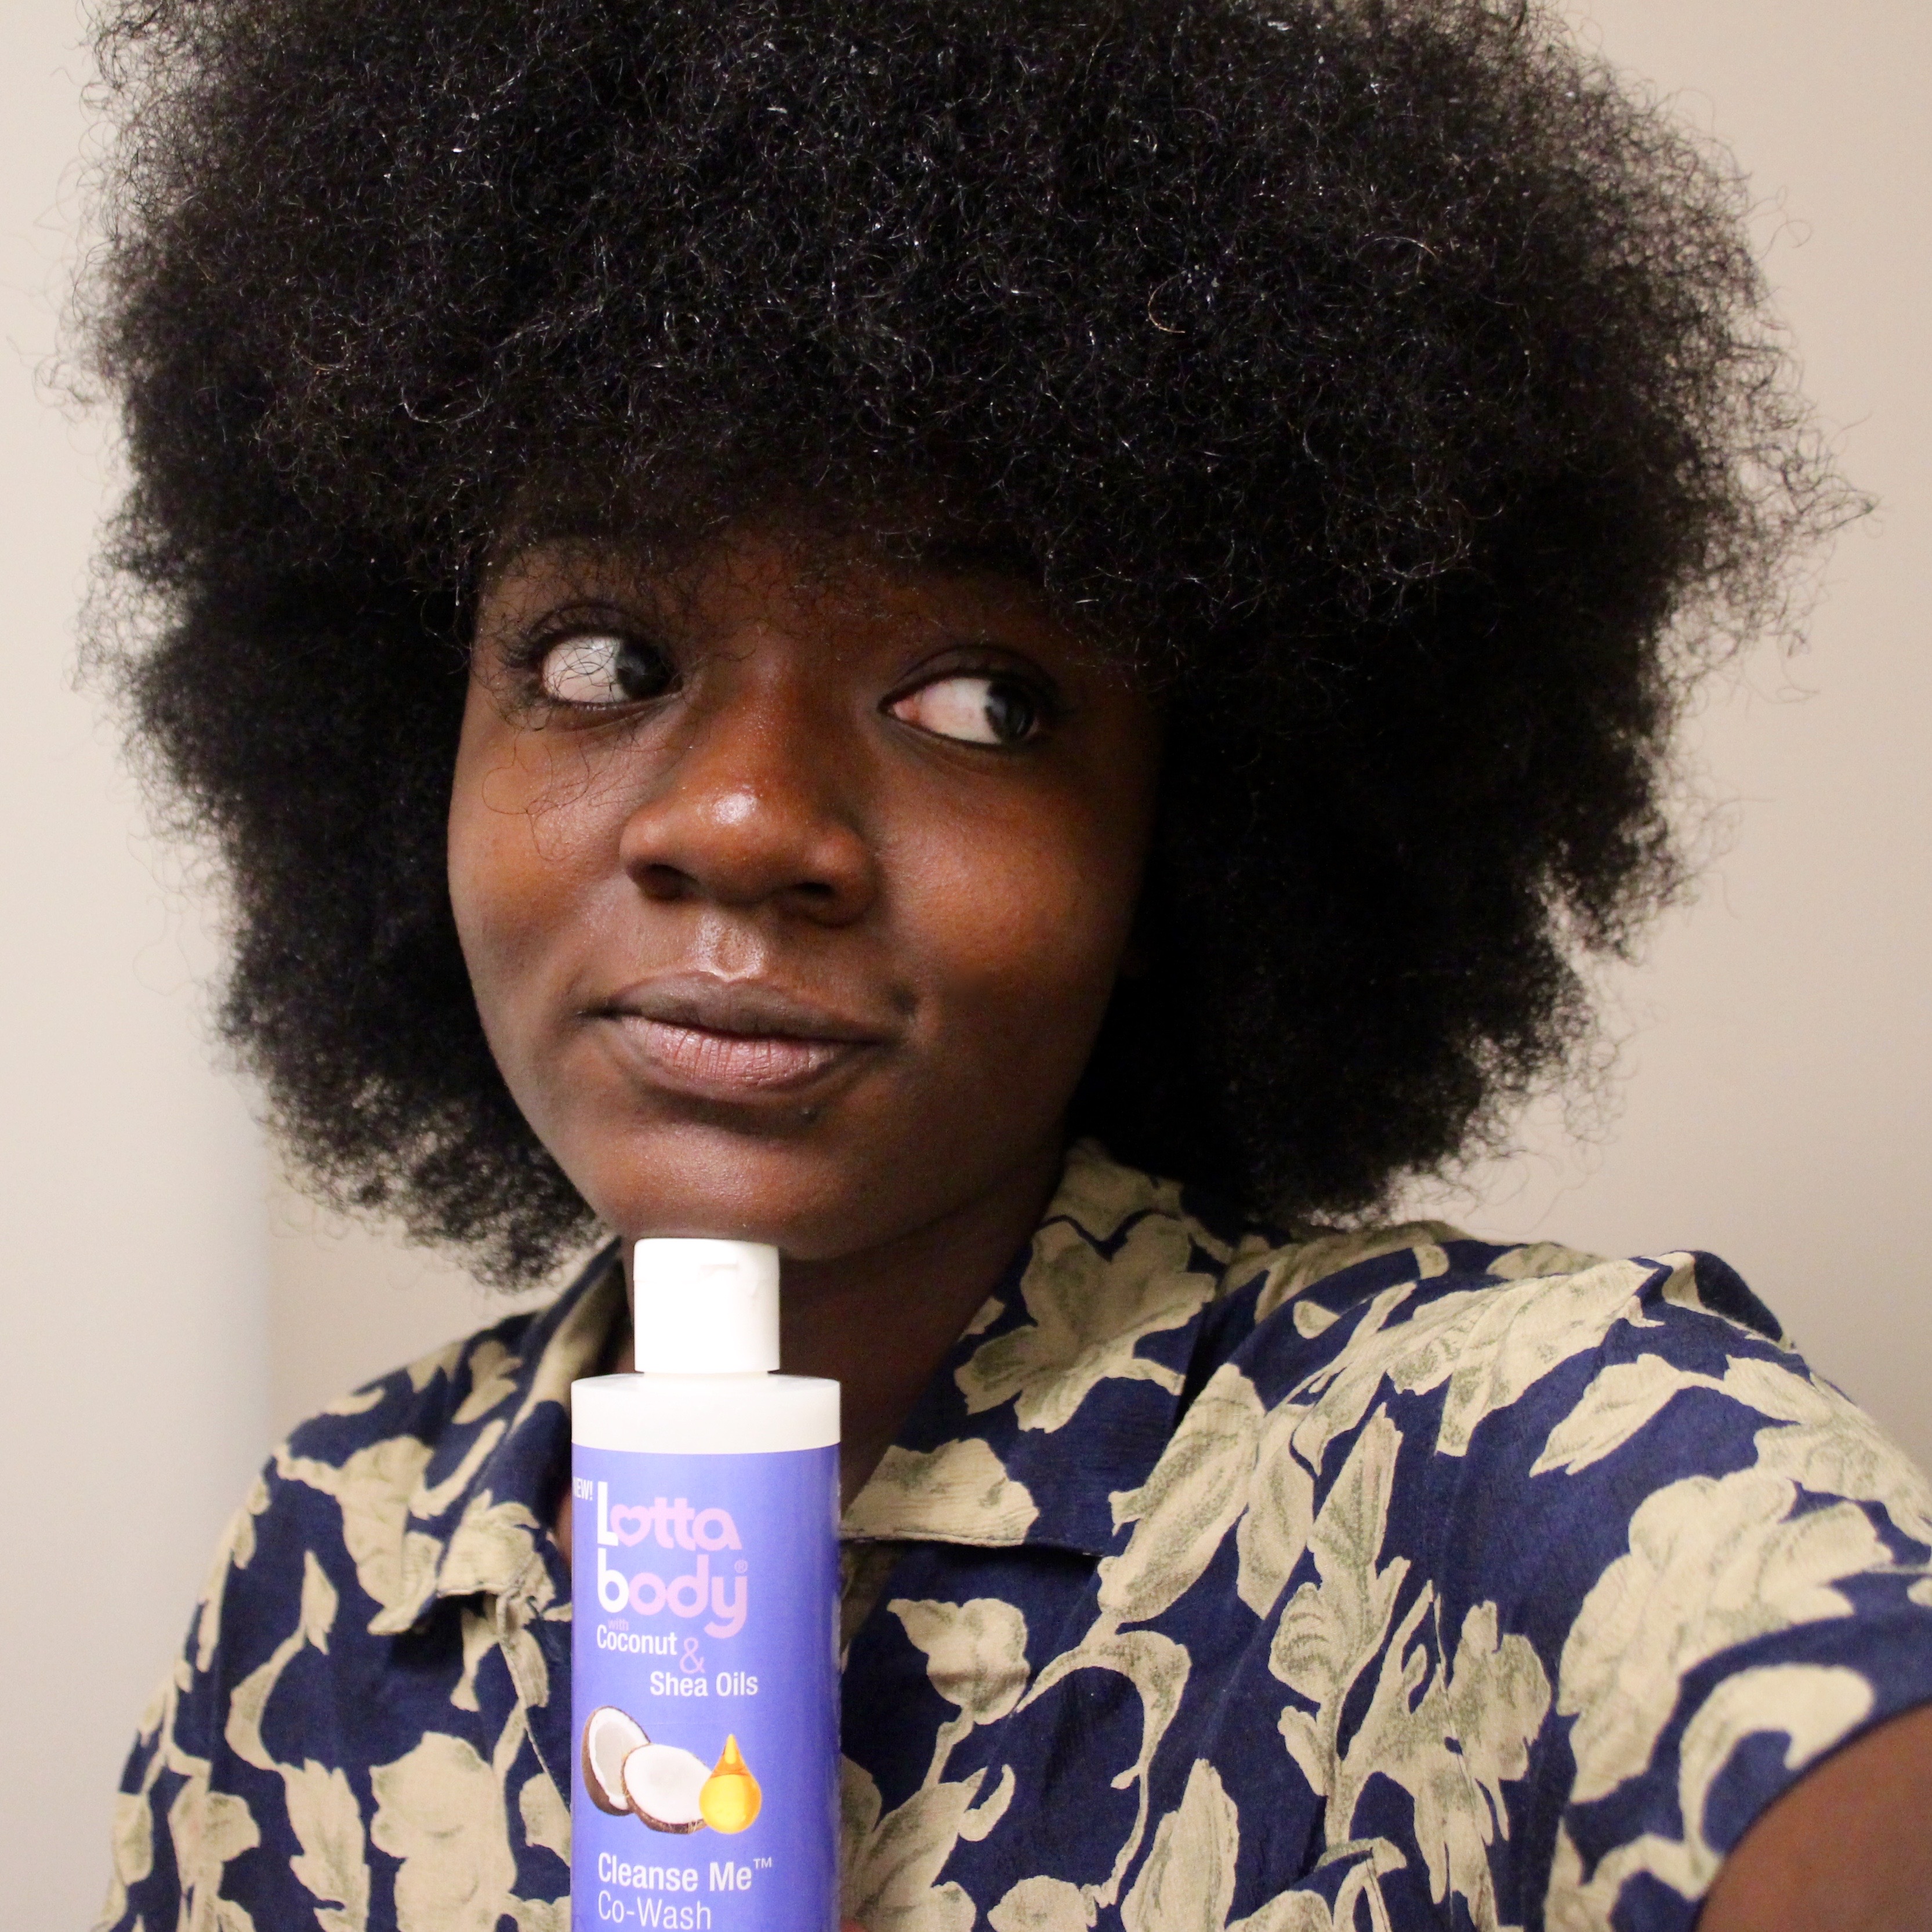 Curls-Understood-lottabody-cleanse-co-wash-Hannah-Quirk-Queen